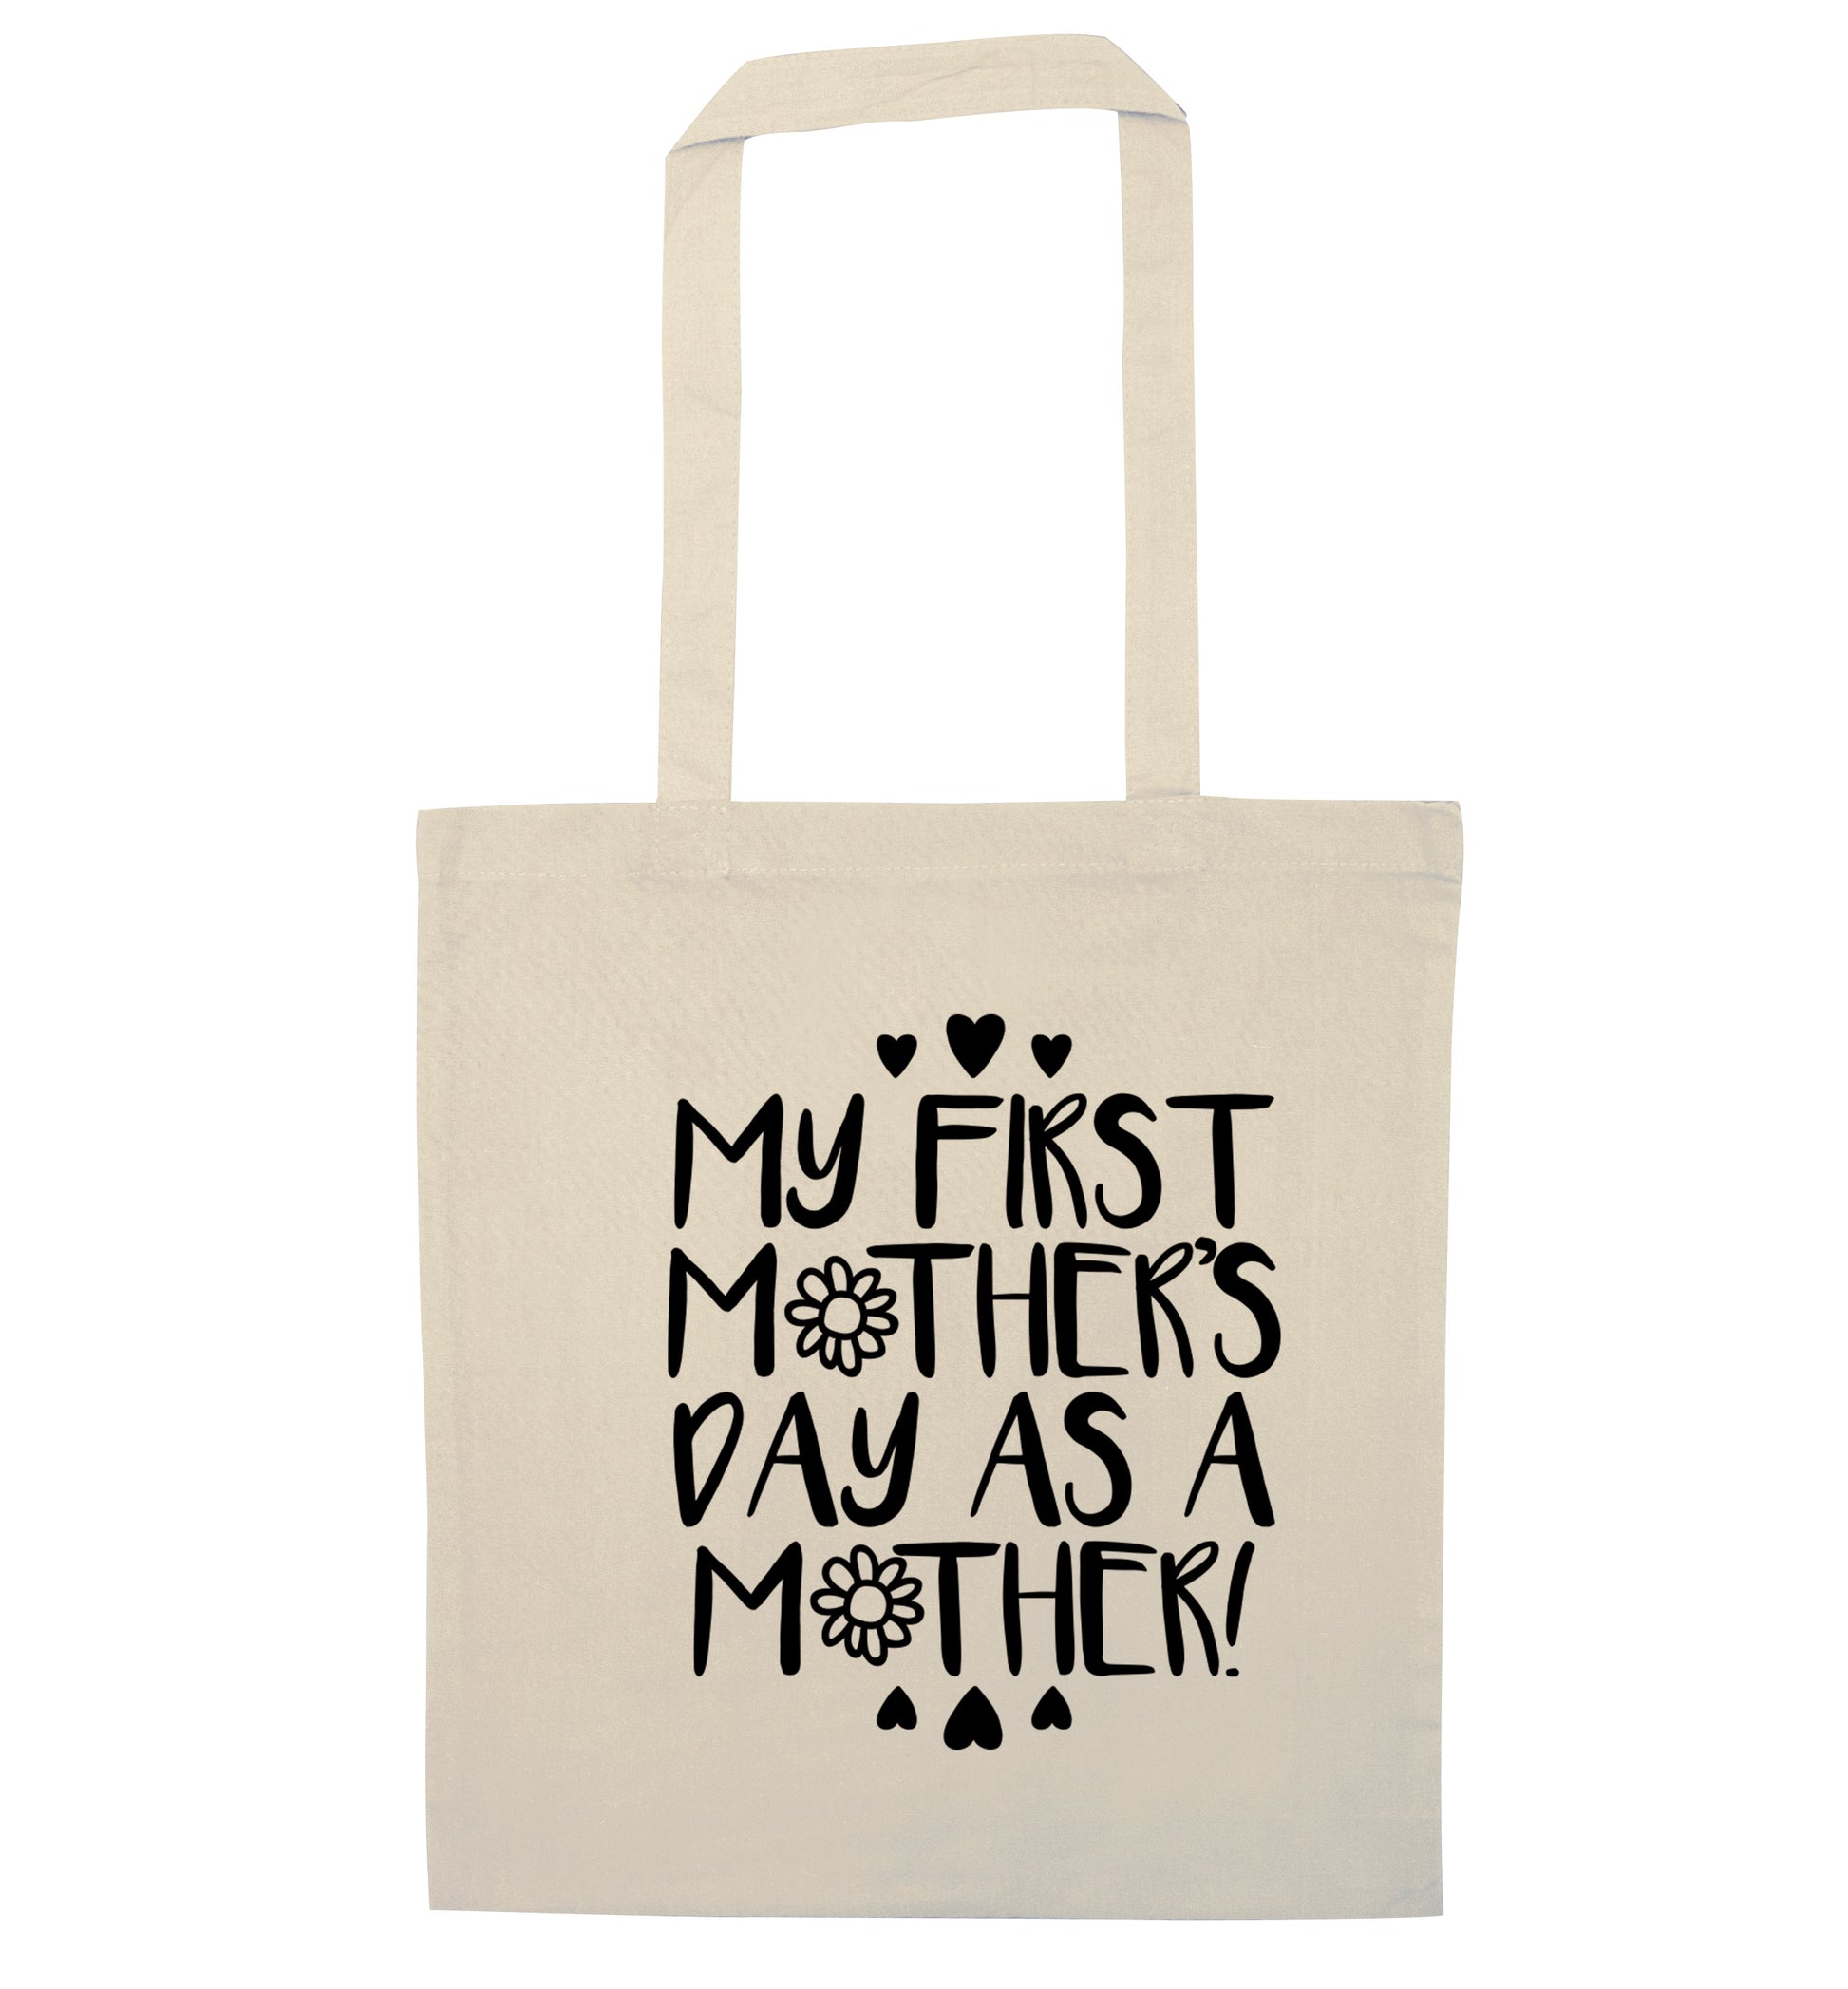 My first mother's day as a mother natural tote bag